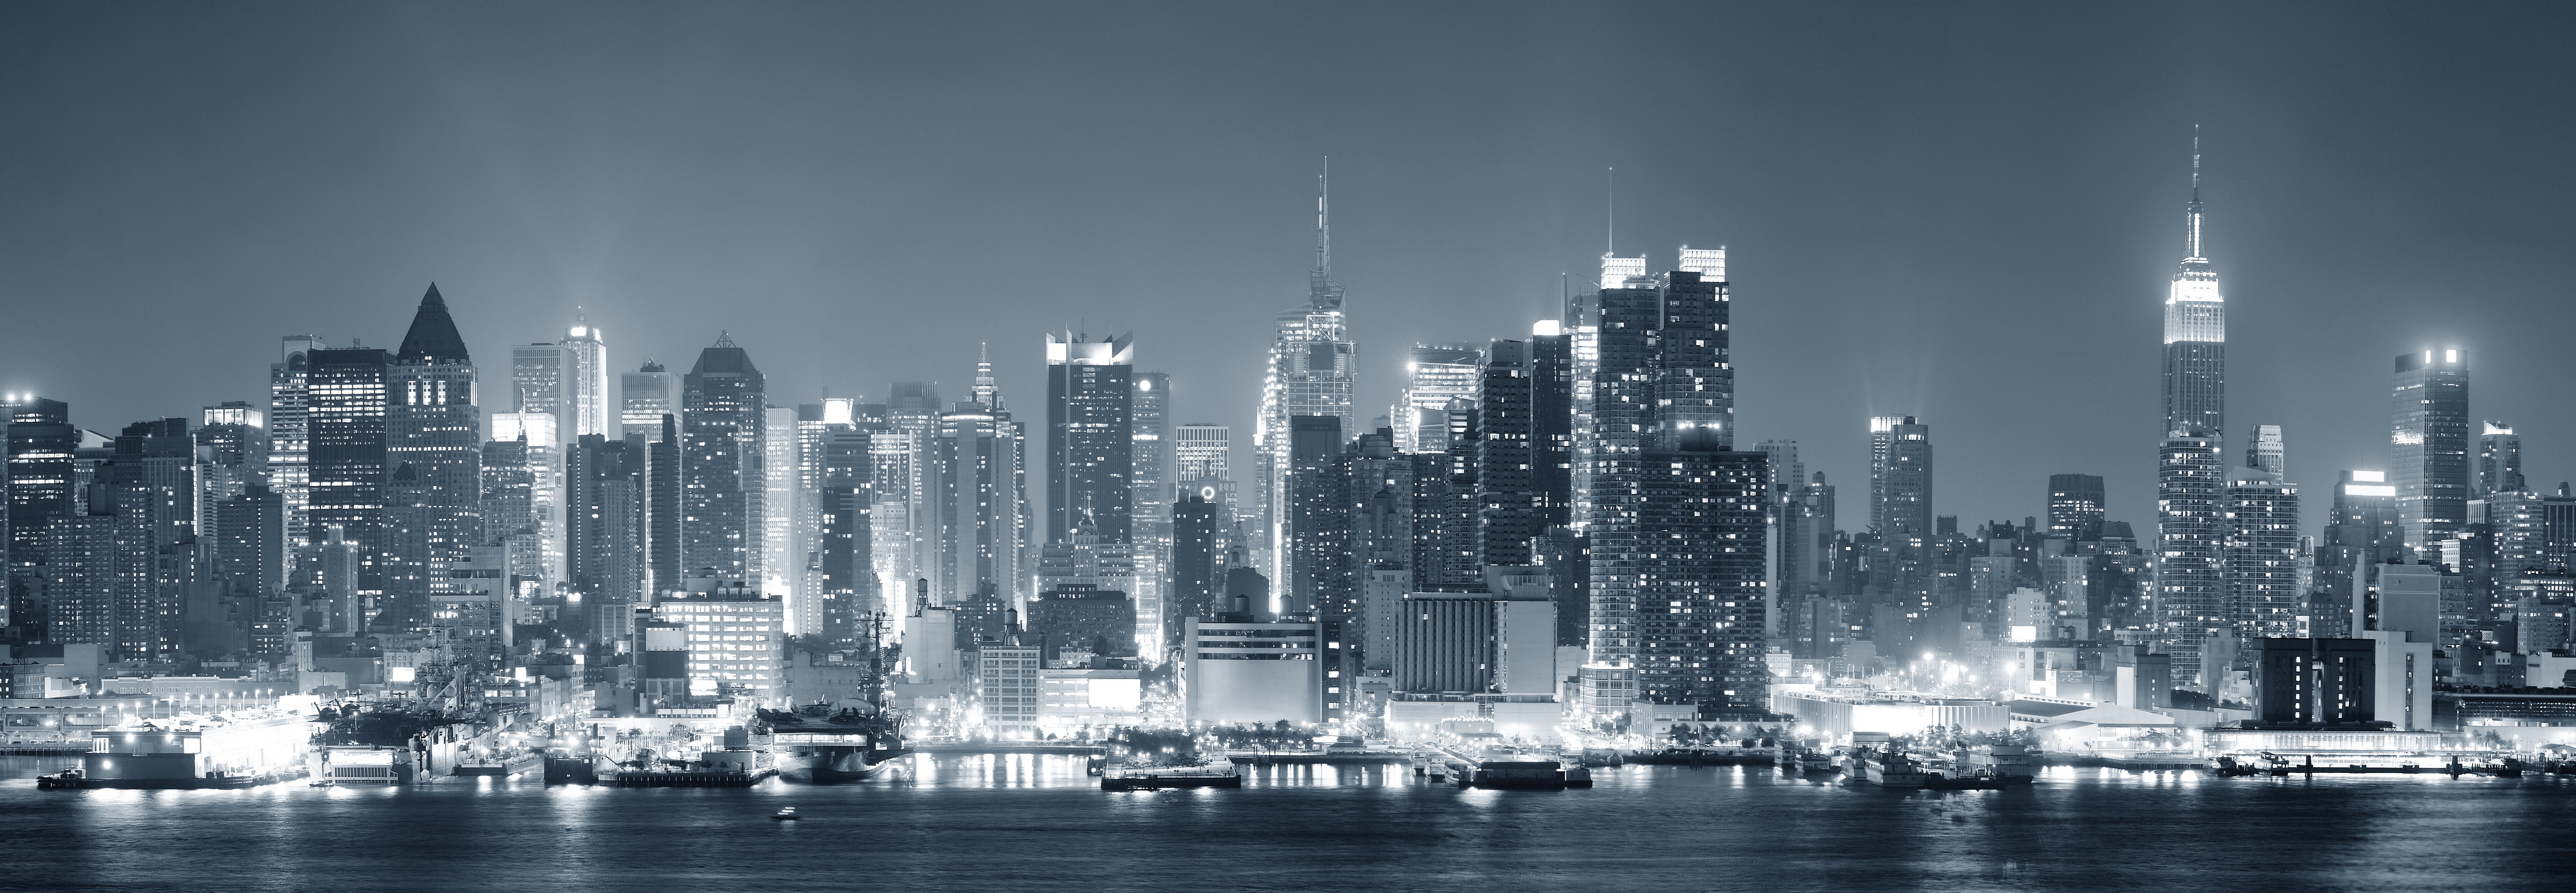 5 New York HD Wallpapers Backgrounds - Wallpaper Abyss